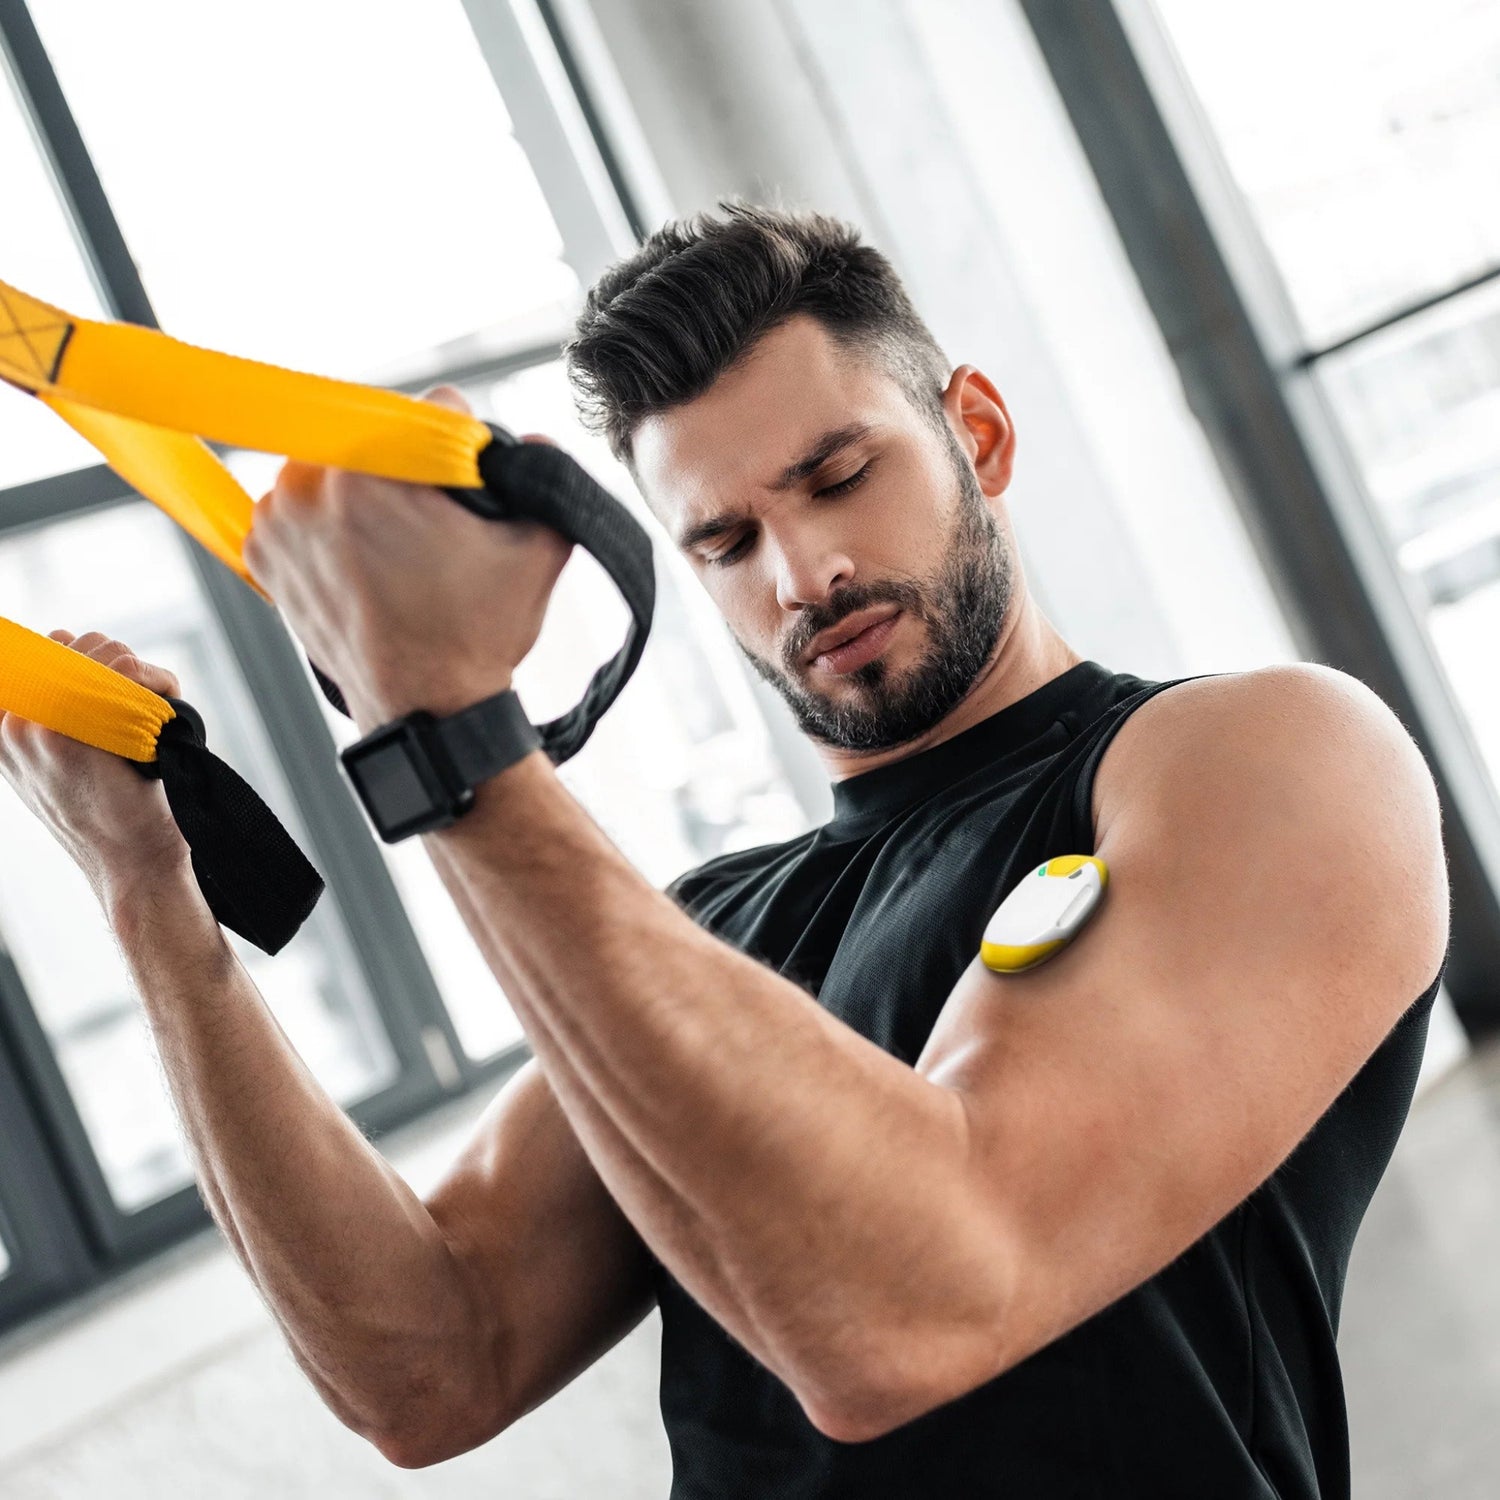 man wearing a callibri sensor on this arm whilst working out